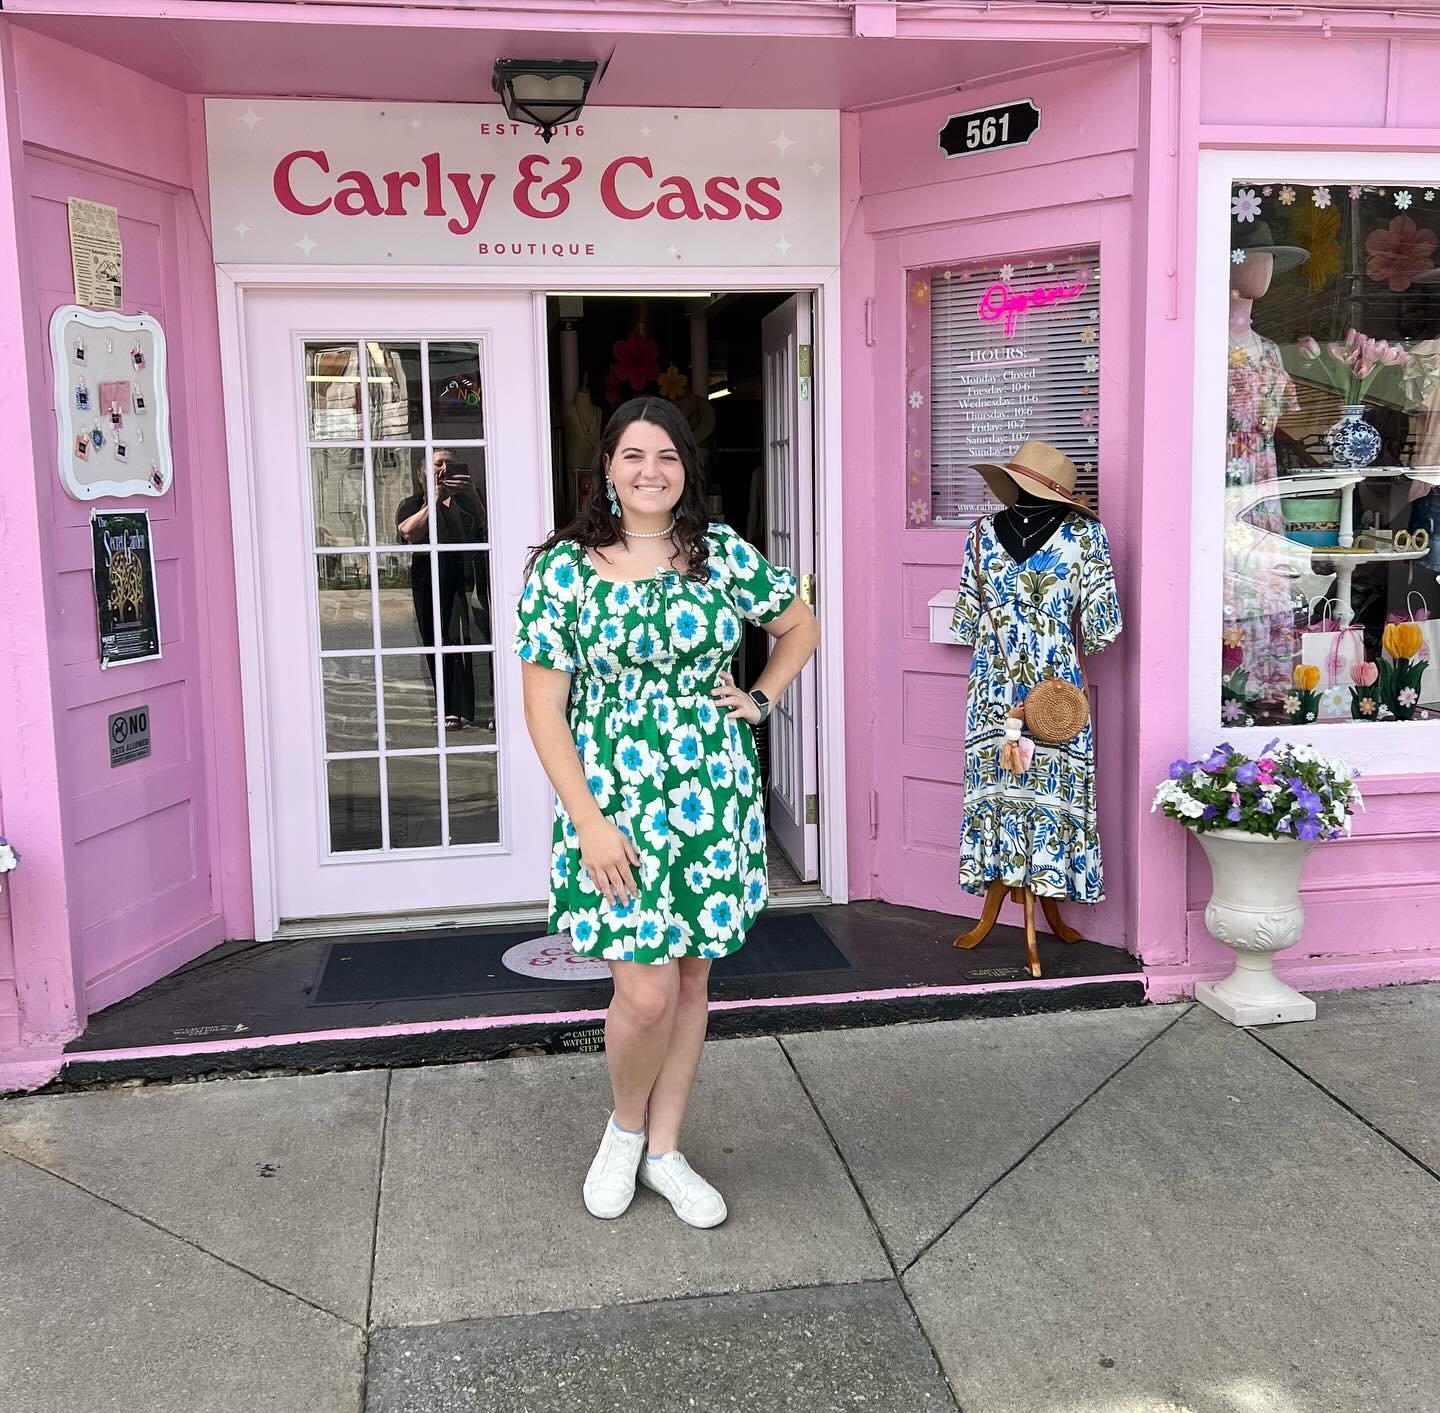 This cute dress that our gorgeous customer Savannah is wearing is available in our Sylva store! We were so happy she let us take her picture wearing it, this dress is so beautiful on her! 😍💕